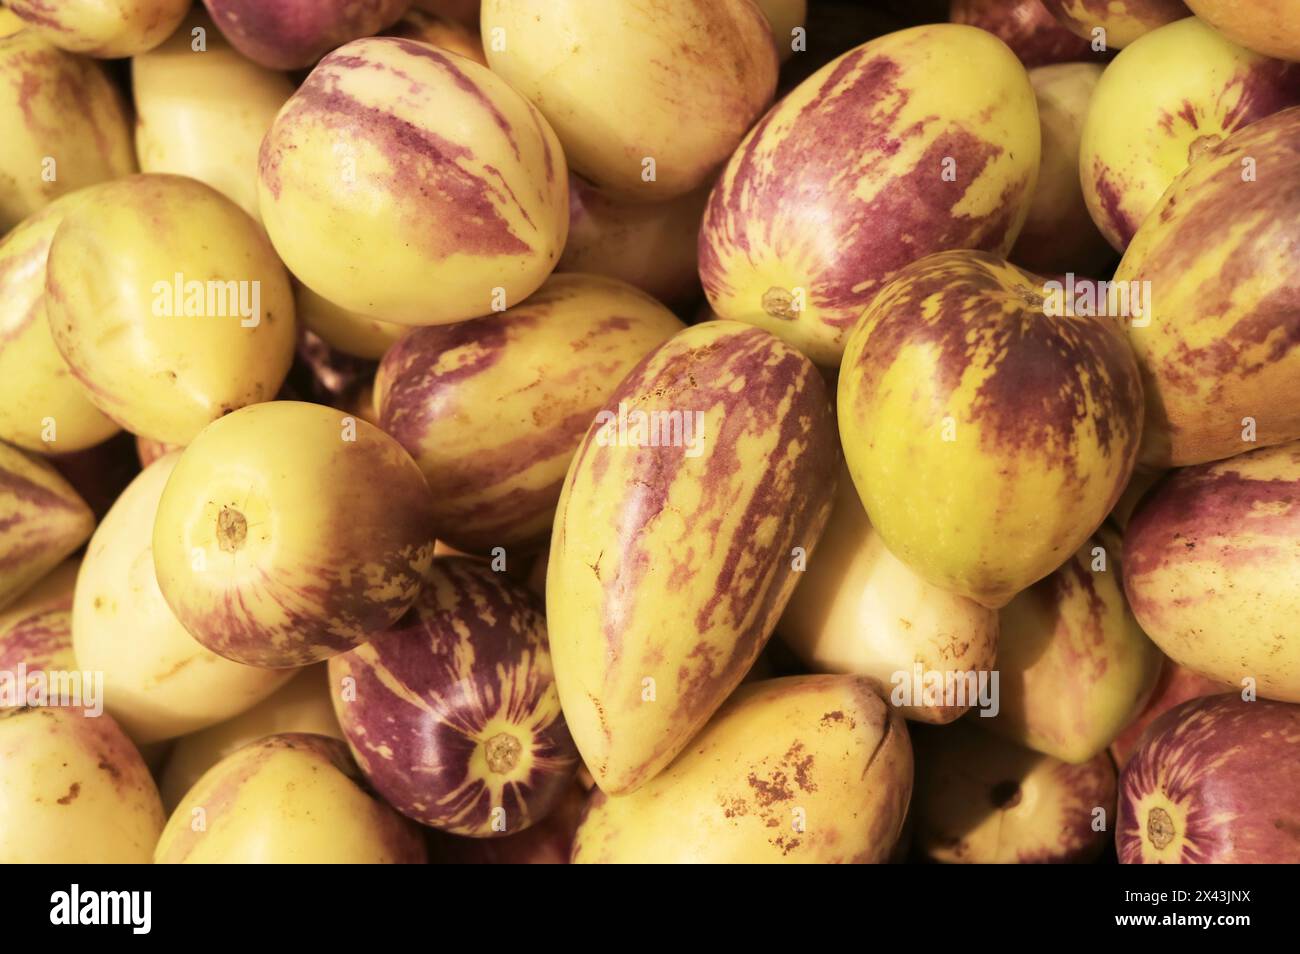 Pile of Pepino Dulce or Pepino Melon Fruits for Sale in Local Market of Santiago, Chile, South America Stock Photo